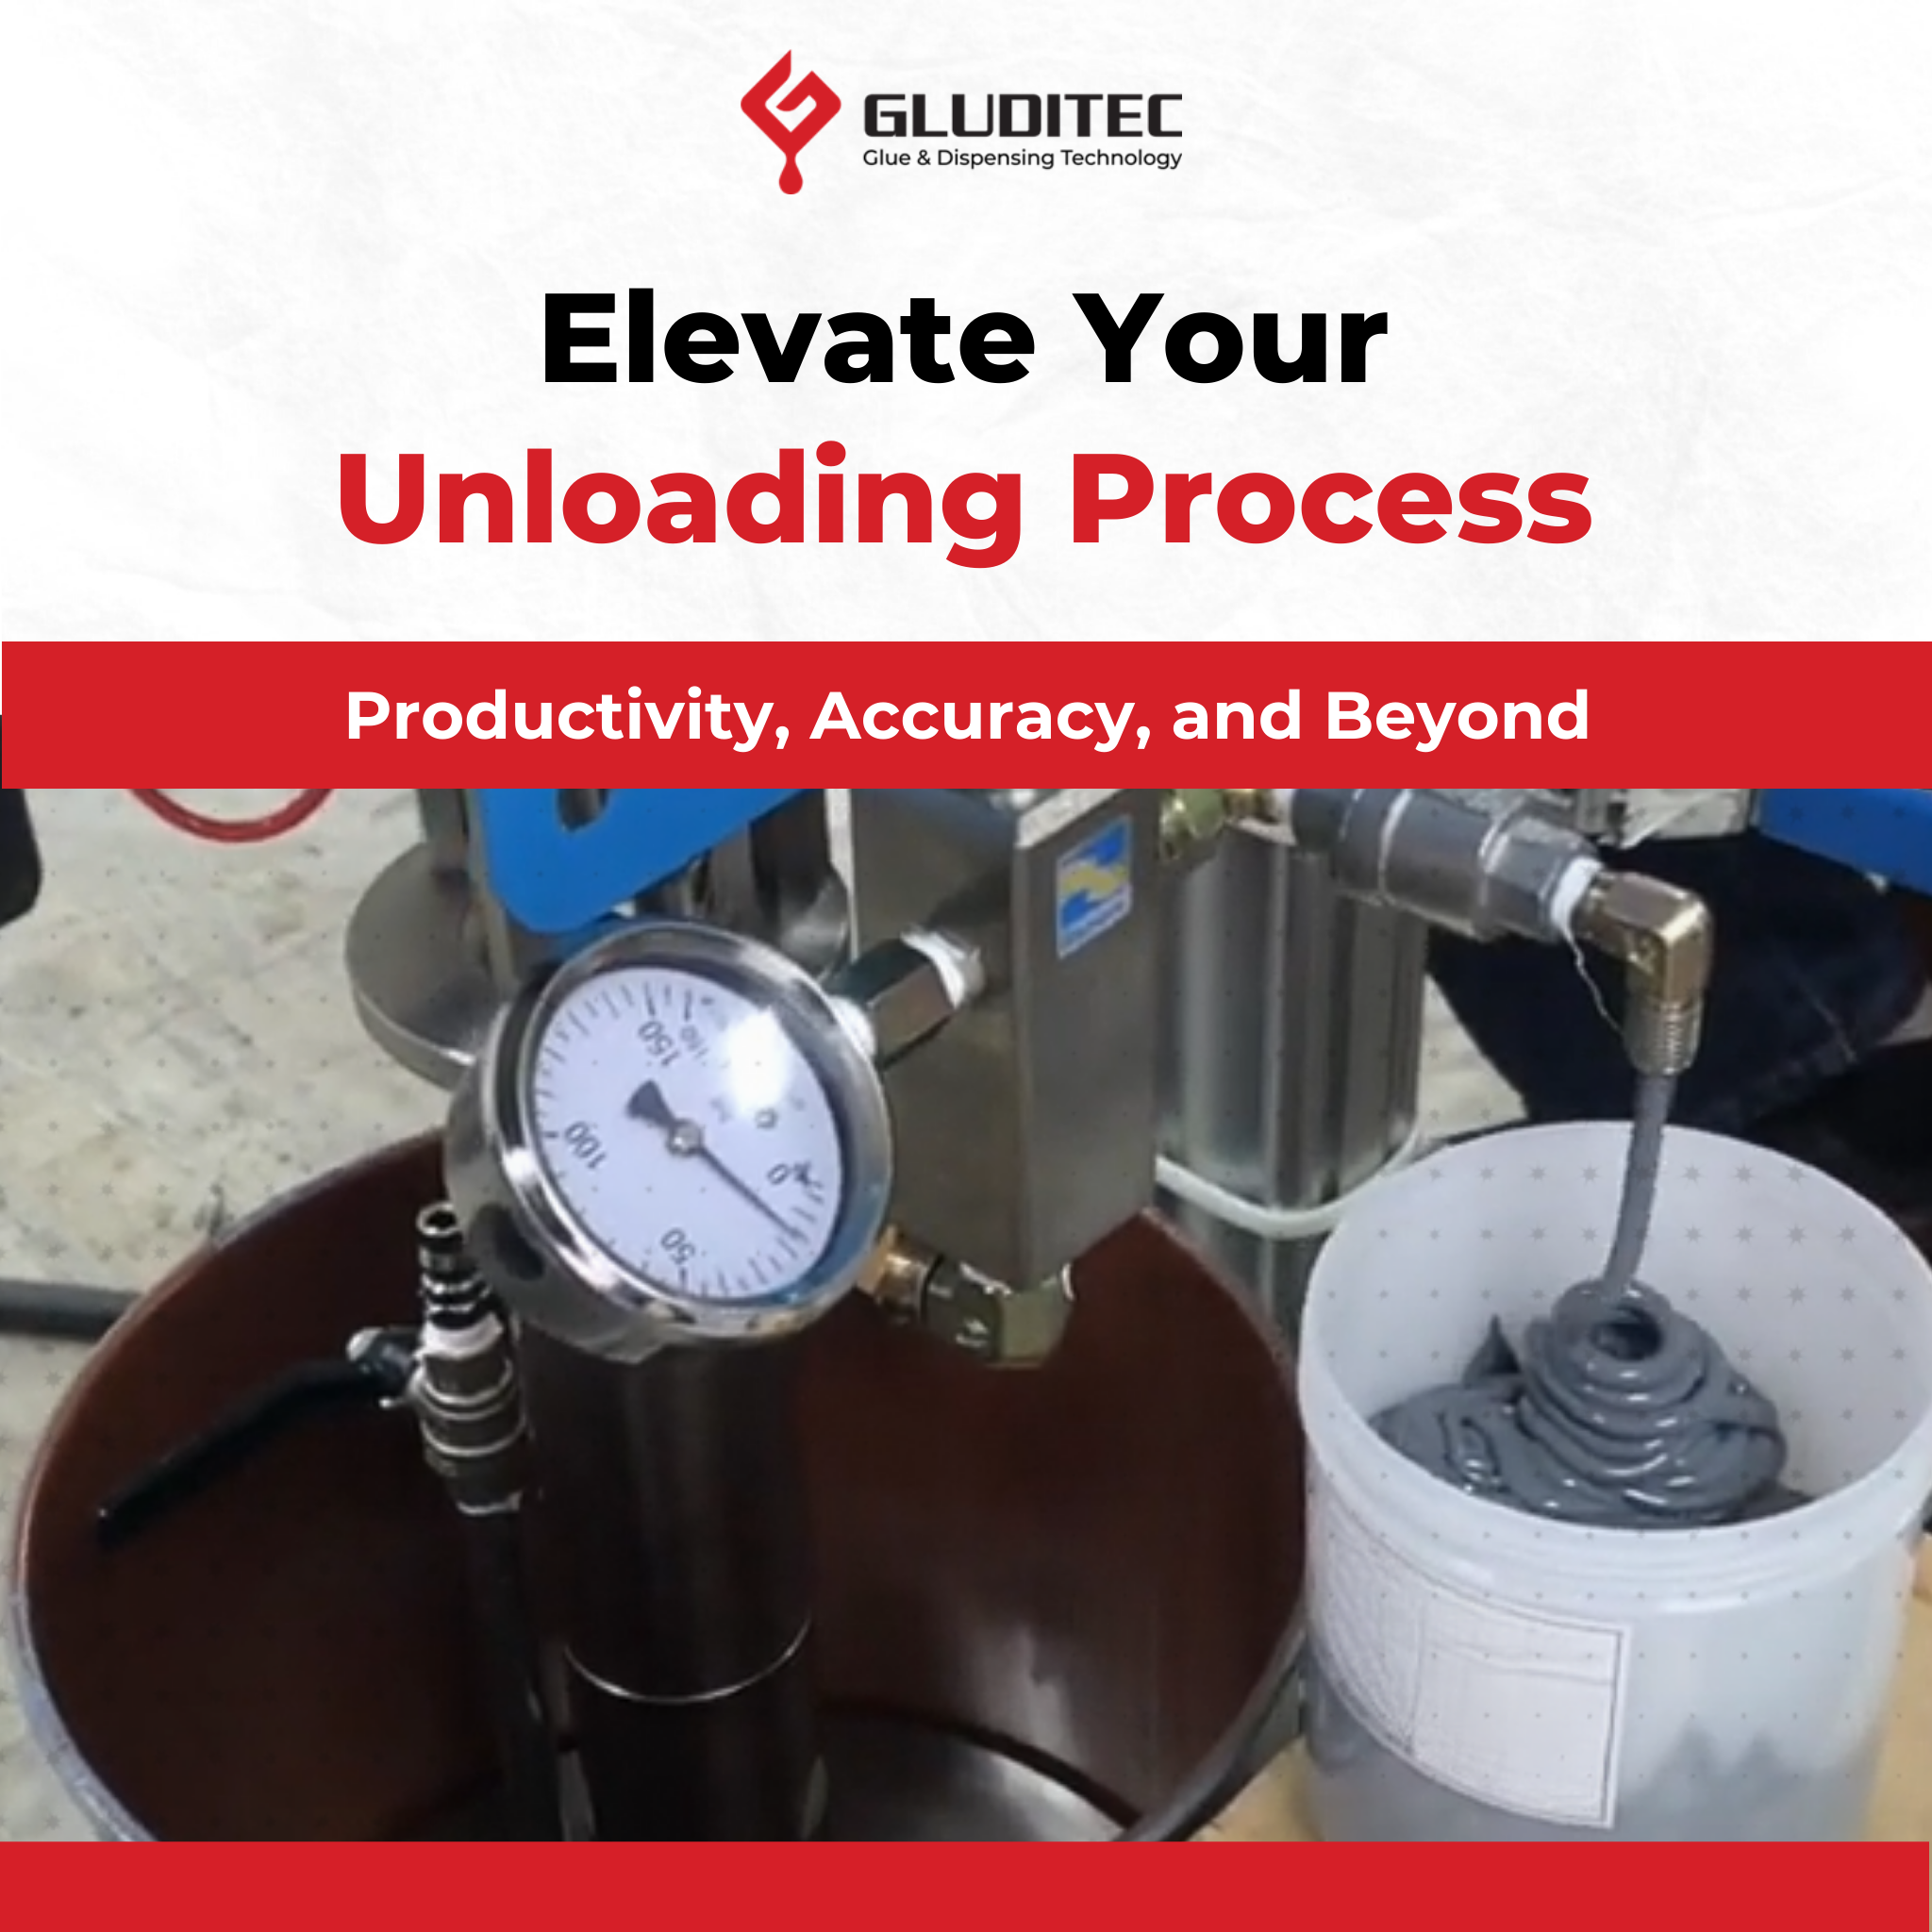 Bulk Material Unloaders: Productivity, Accuracy, and Beyond